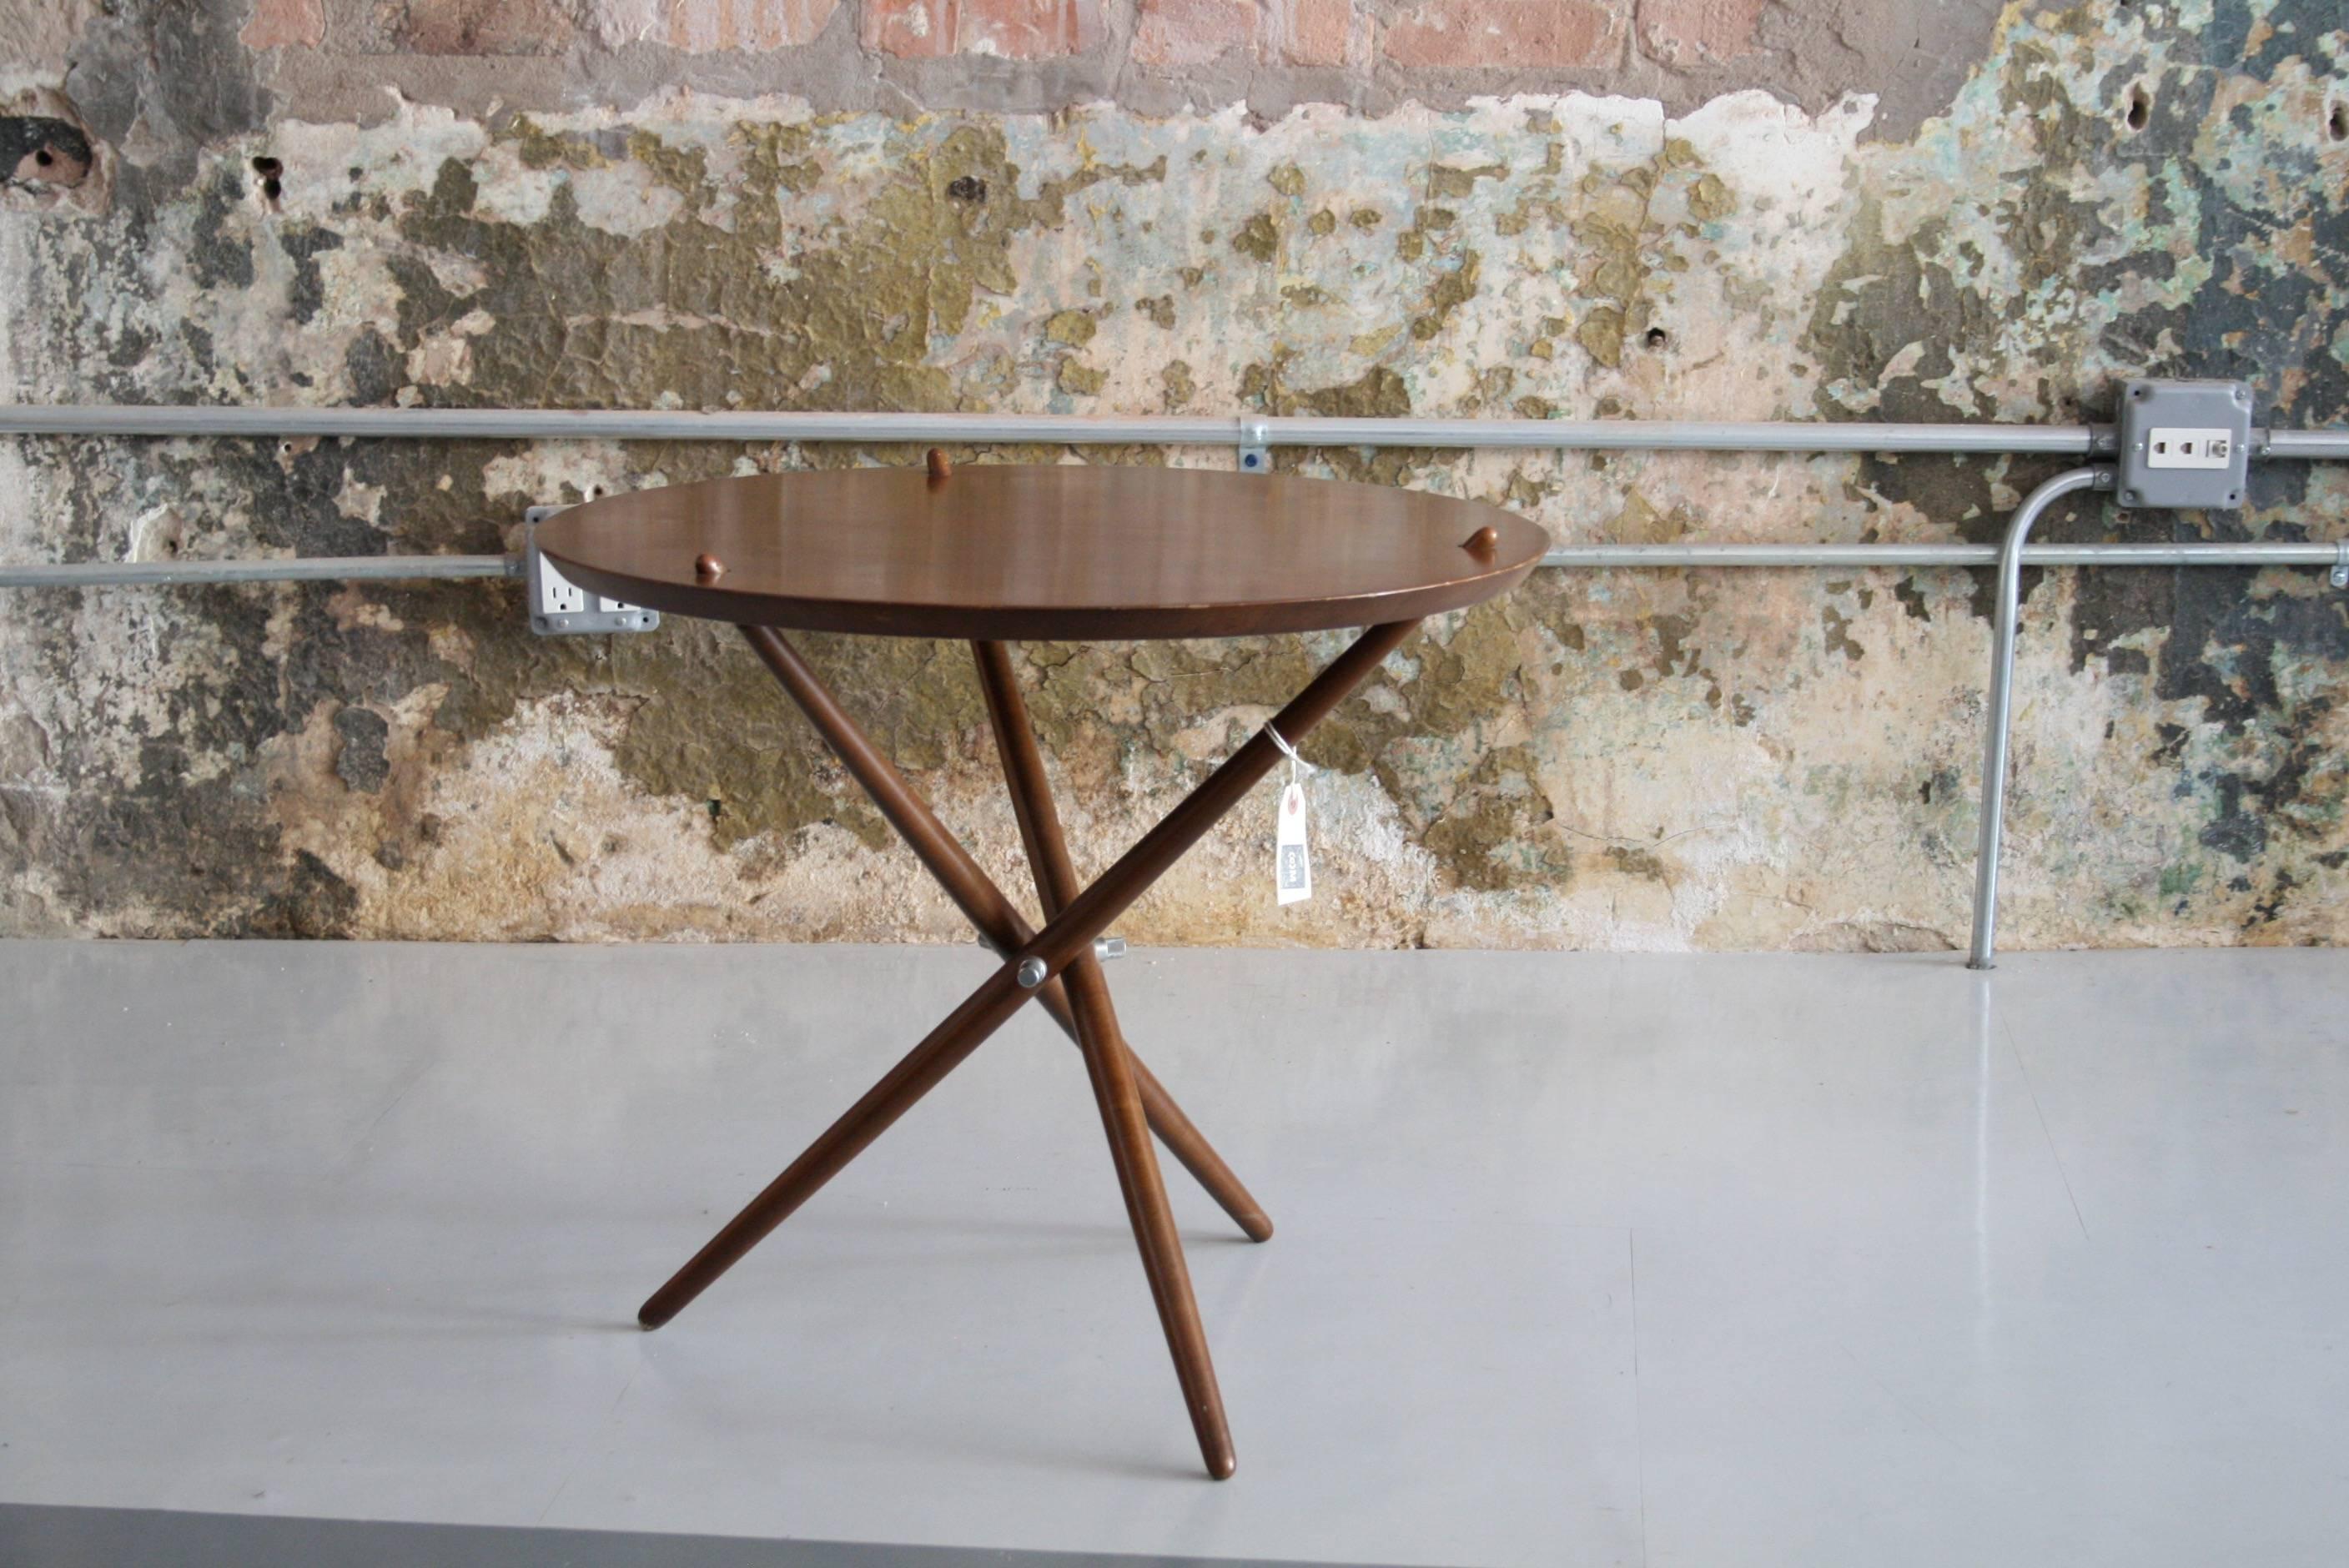 American 1948 Hans Bellman Swiss Modernist Tripod Table for Wohnbedarf Imported by Knoll